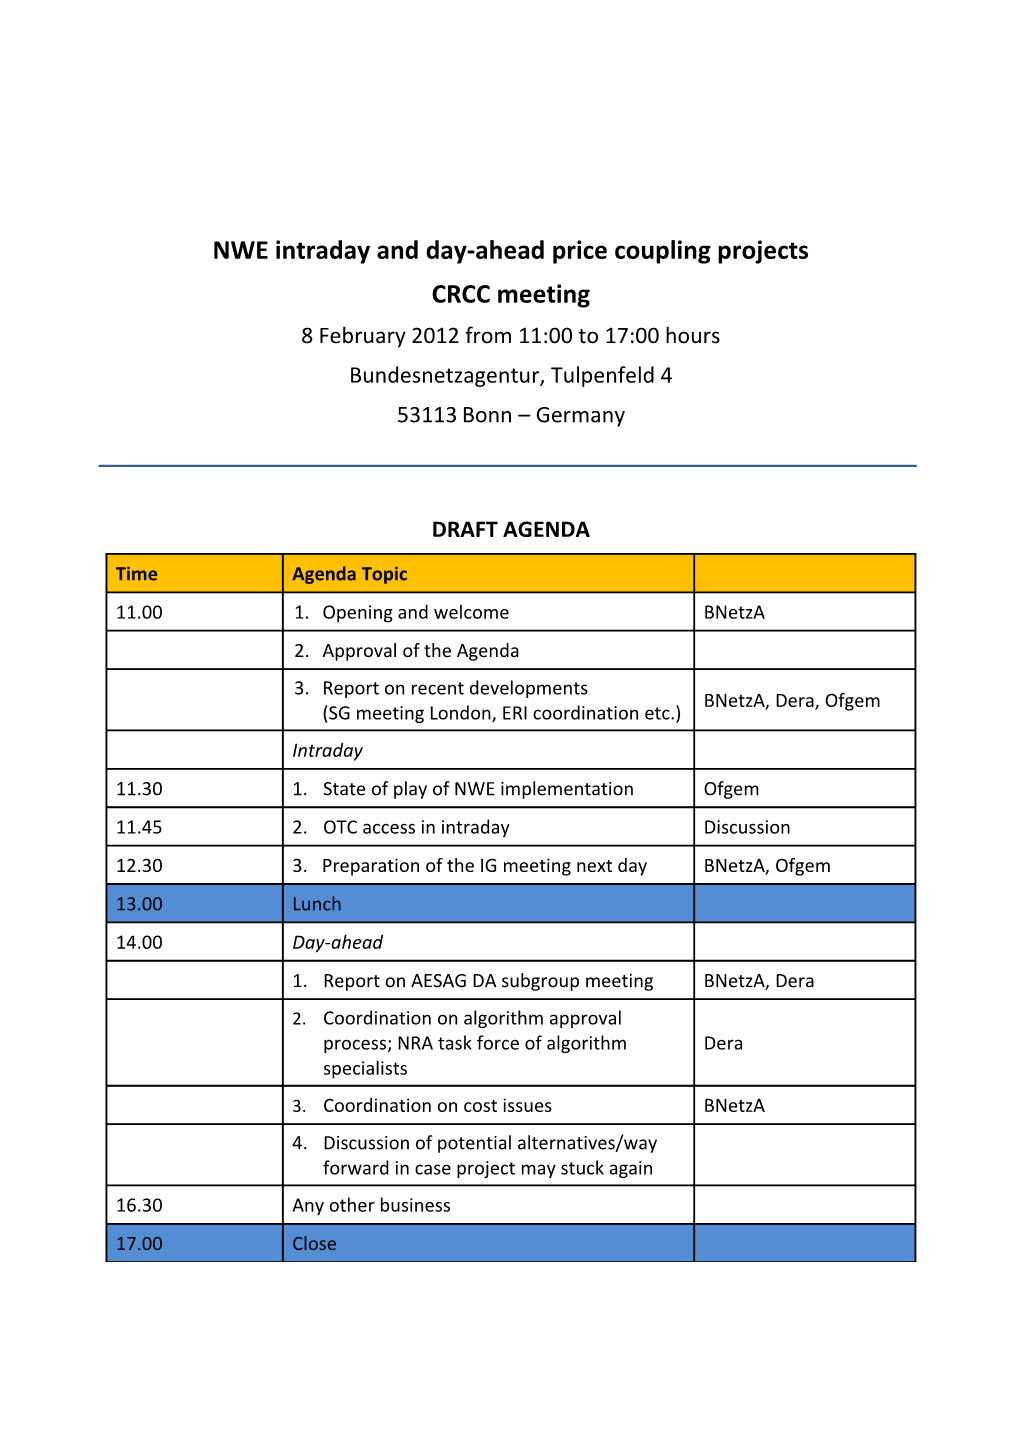 NWE Intraday and Day-Ahead Price Coupling Projects